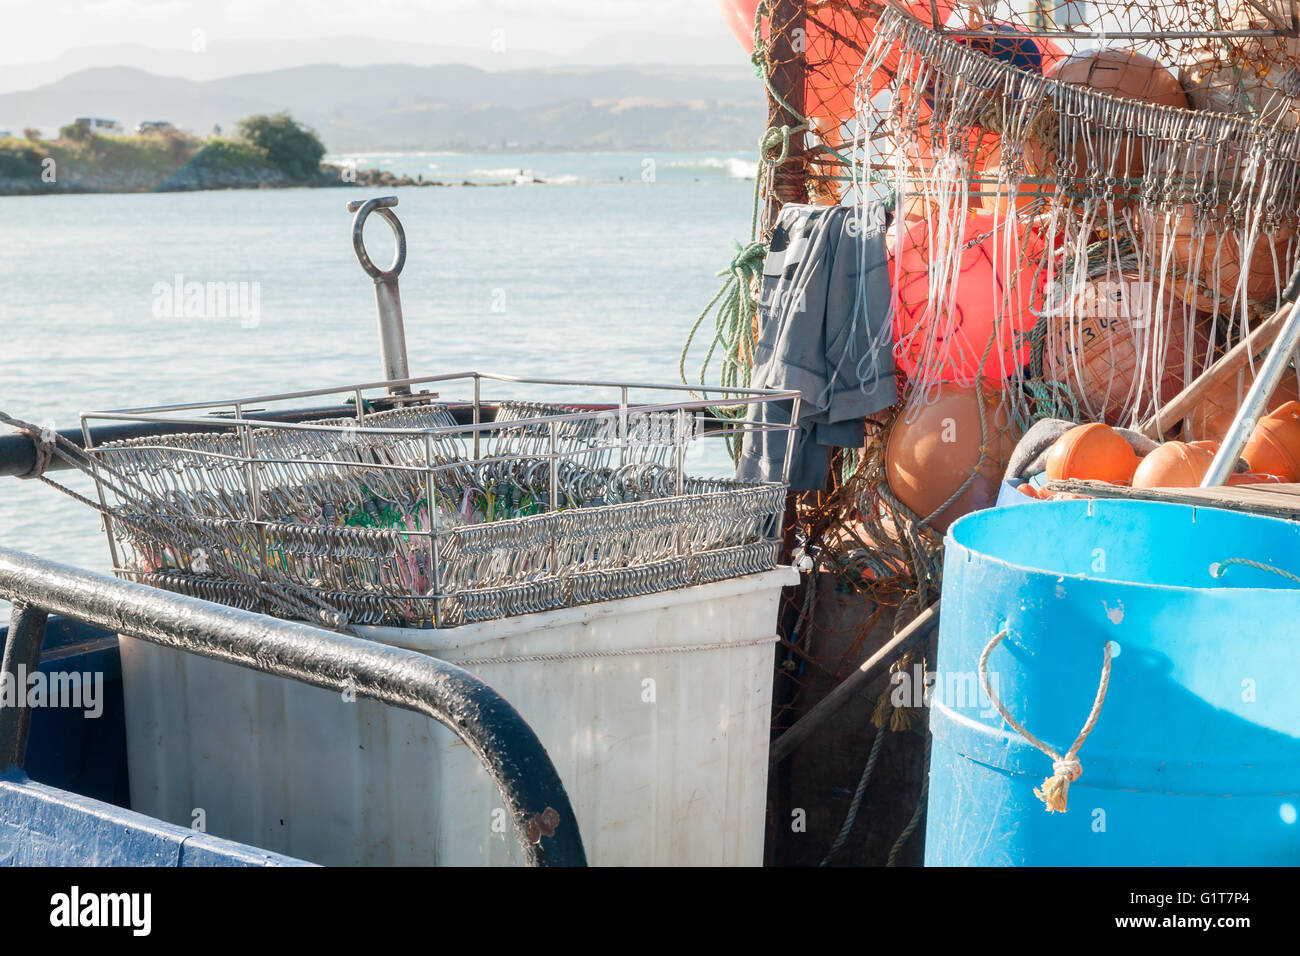 Basket of hooks and lures on a long line fishing trawler in Ahuriri harbour a port for the fishing fleet at Napier on New Zealand's East coast Stock Photo